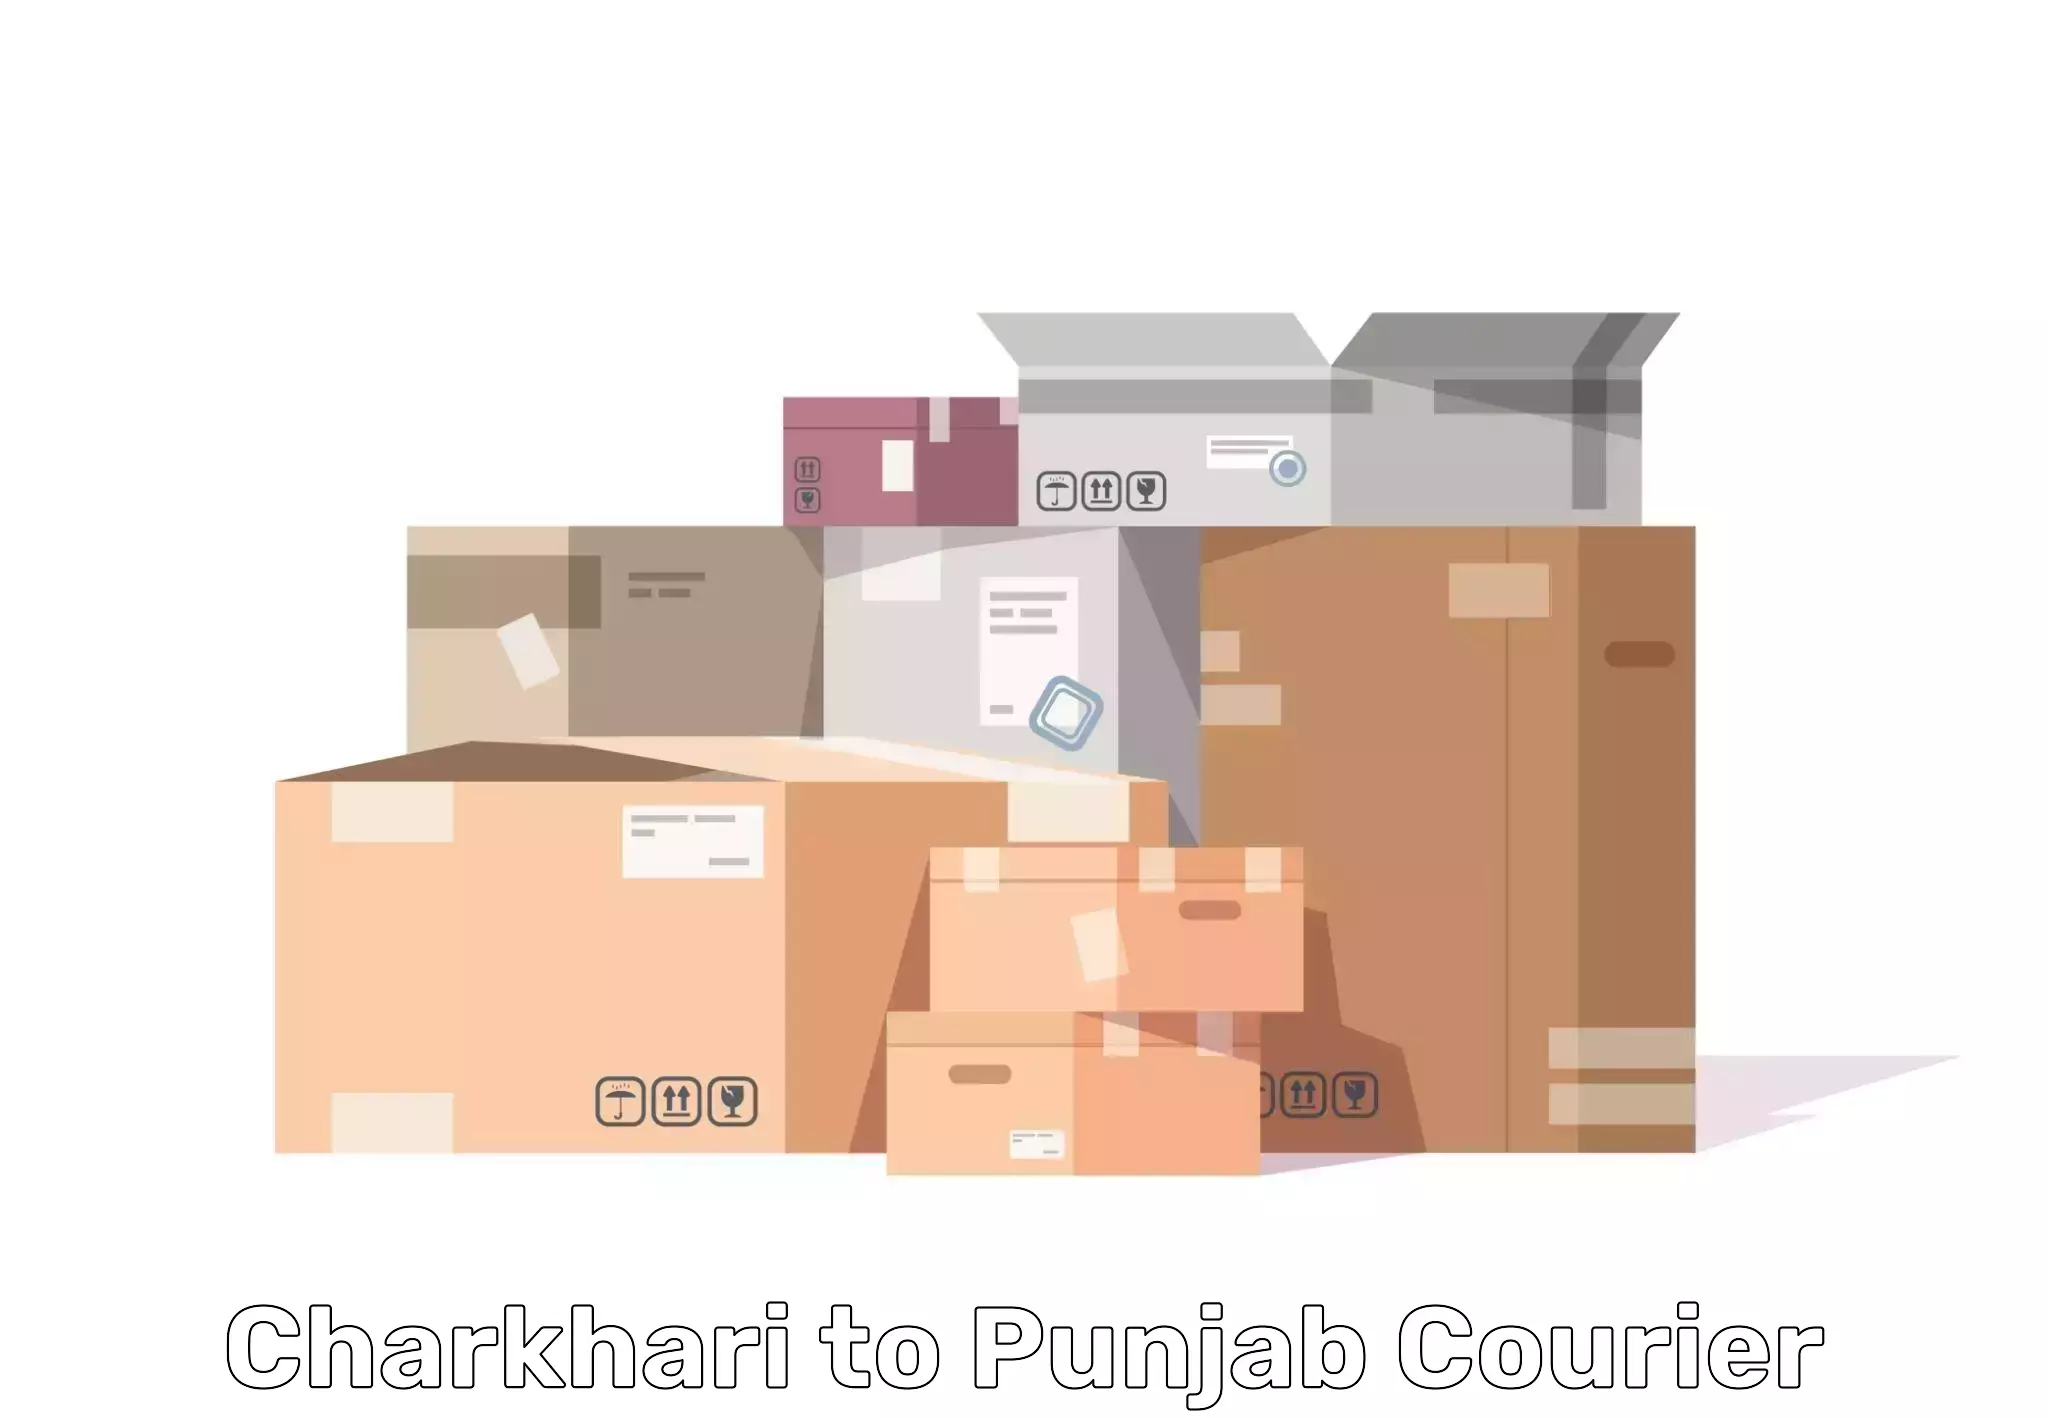 Moving and packing experts Charkhari to Firozpur